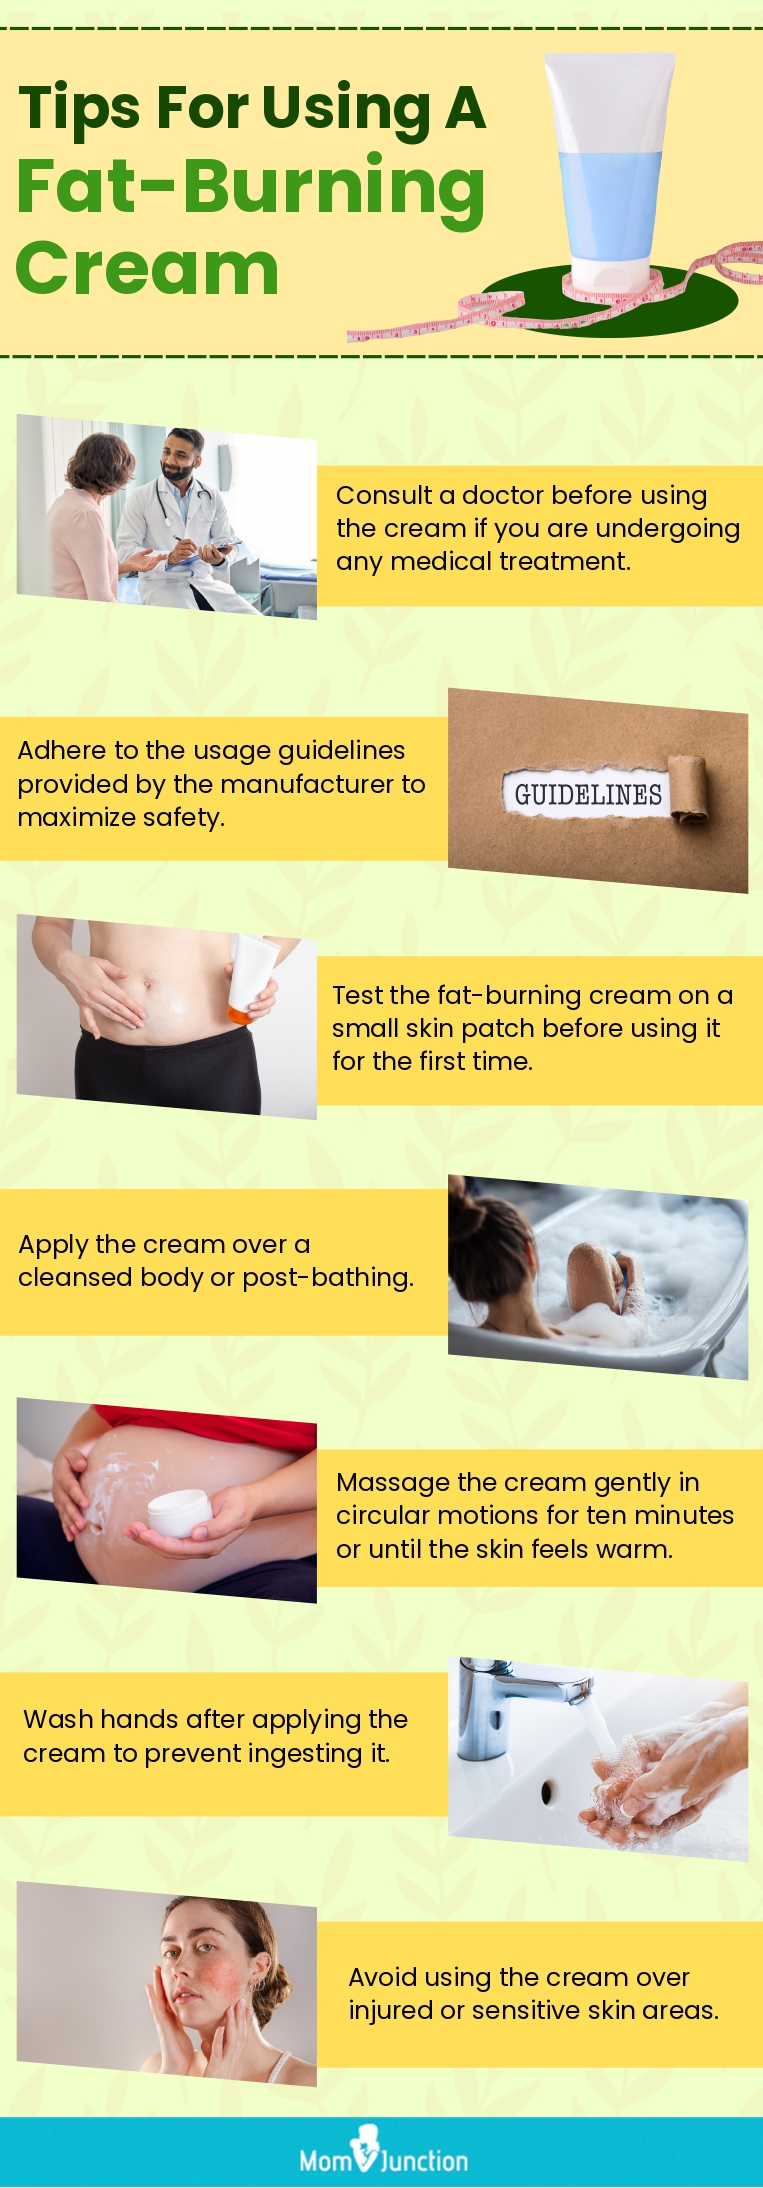 Tips For Using A Fat-Burning Cream (infographic)